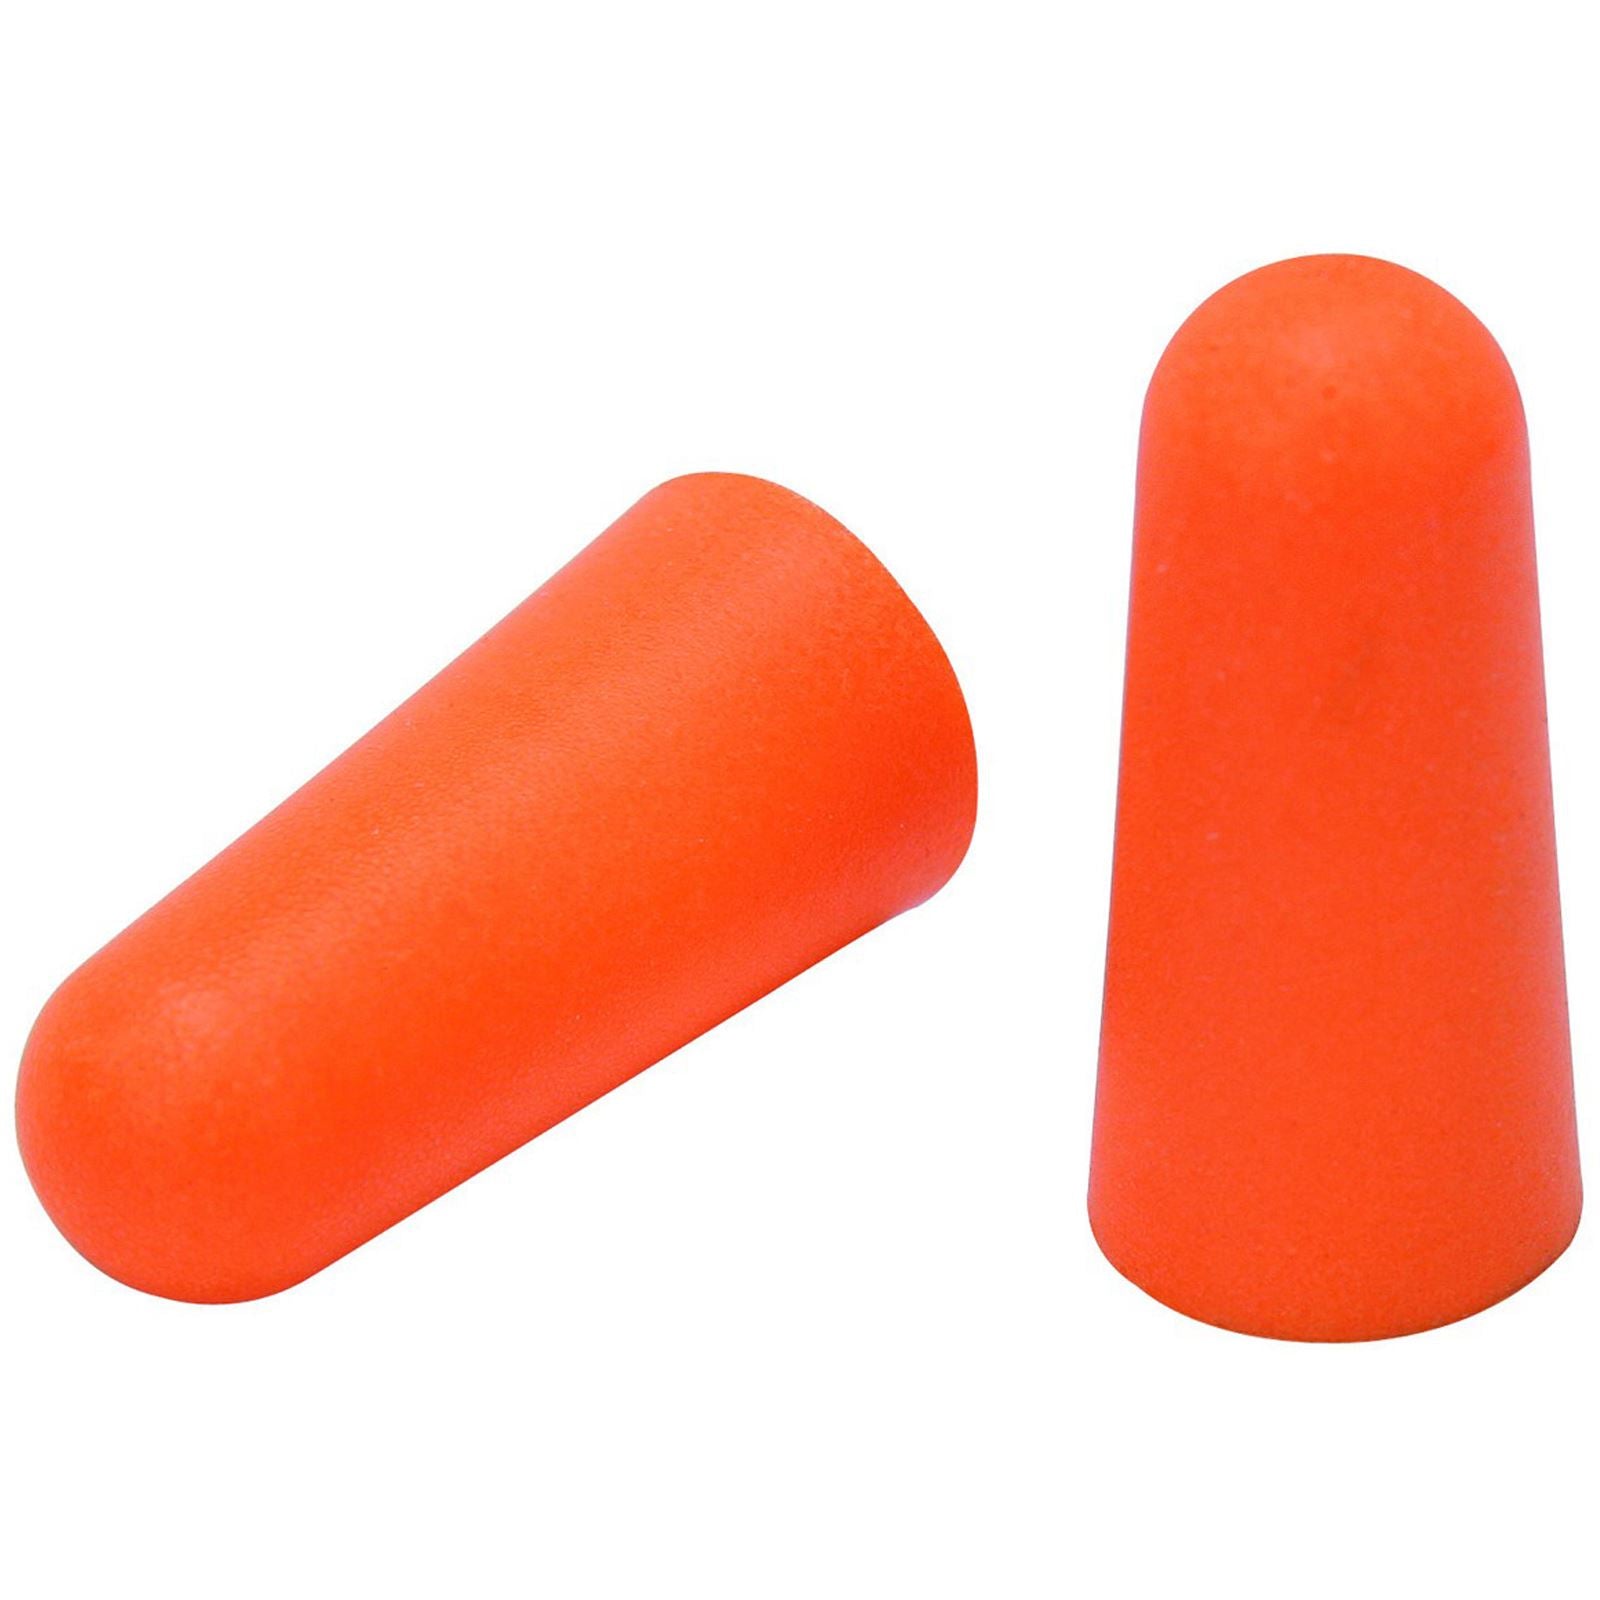 Silverline 200pk Of 2 Piece Ear Plugs SNR 37 dB Disposable Hygienic Hearing Protection